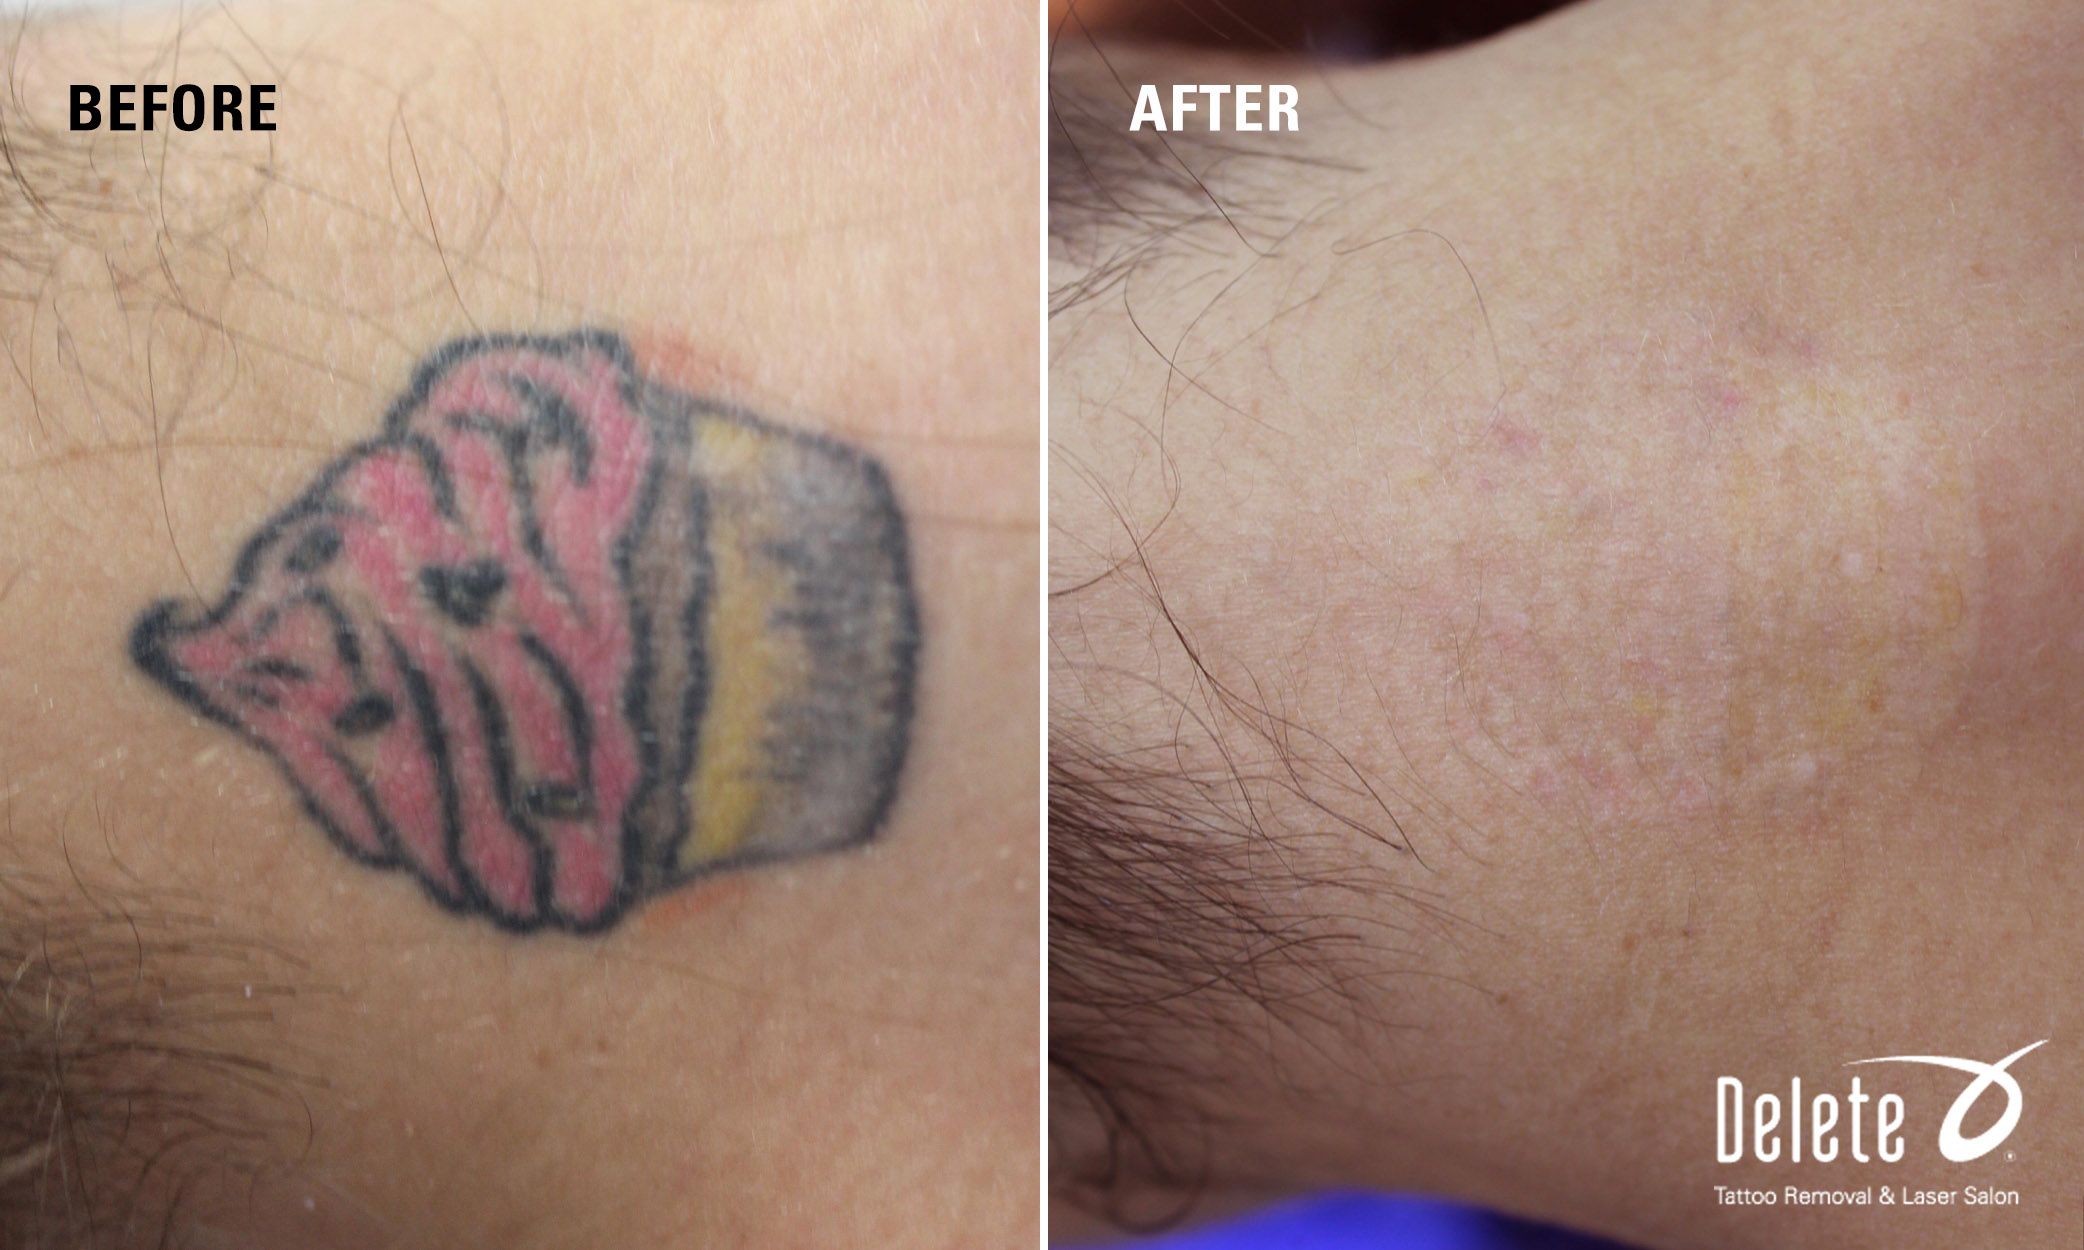 Delete Tattoo Removal & Medical Salon on Twitter: 